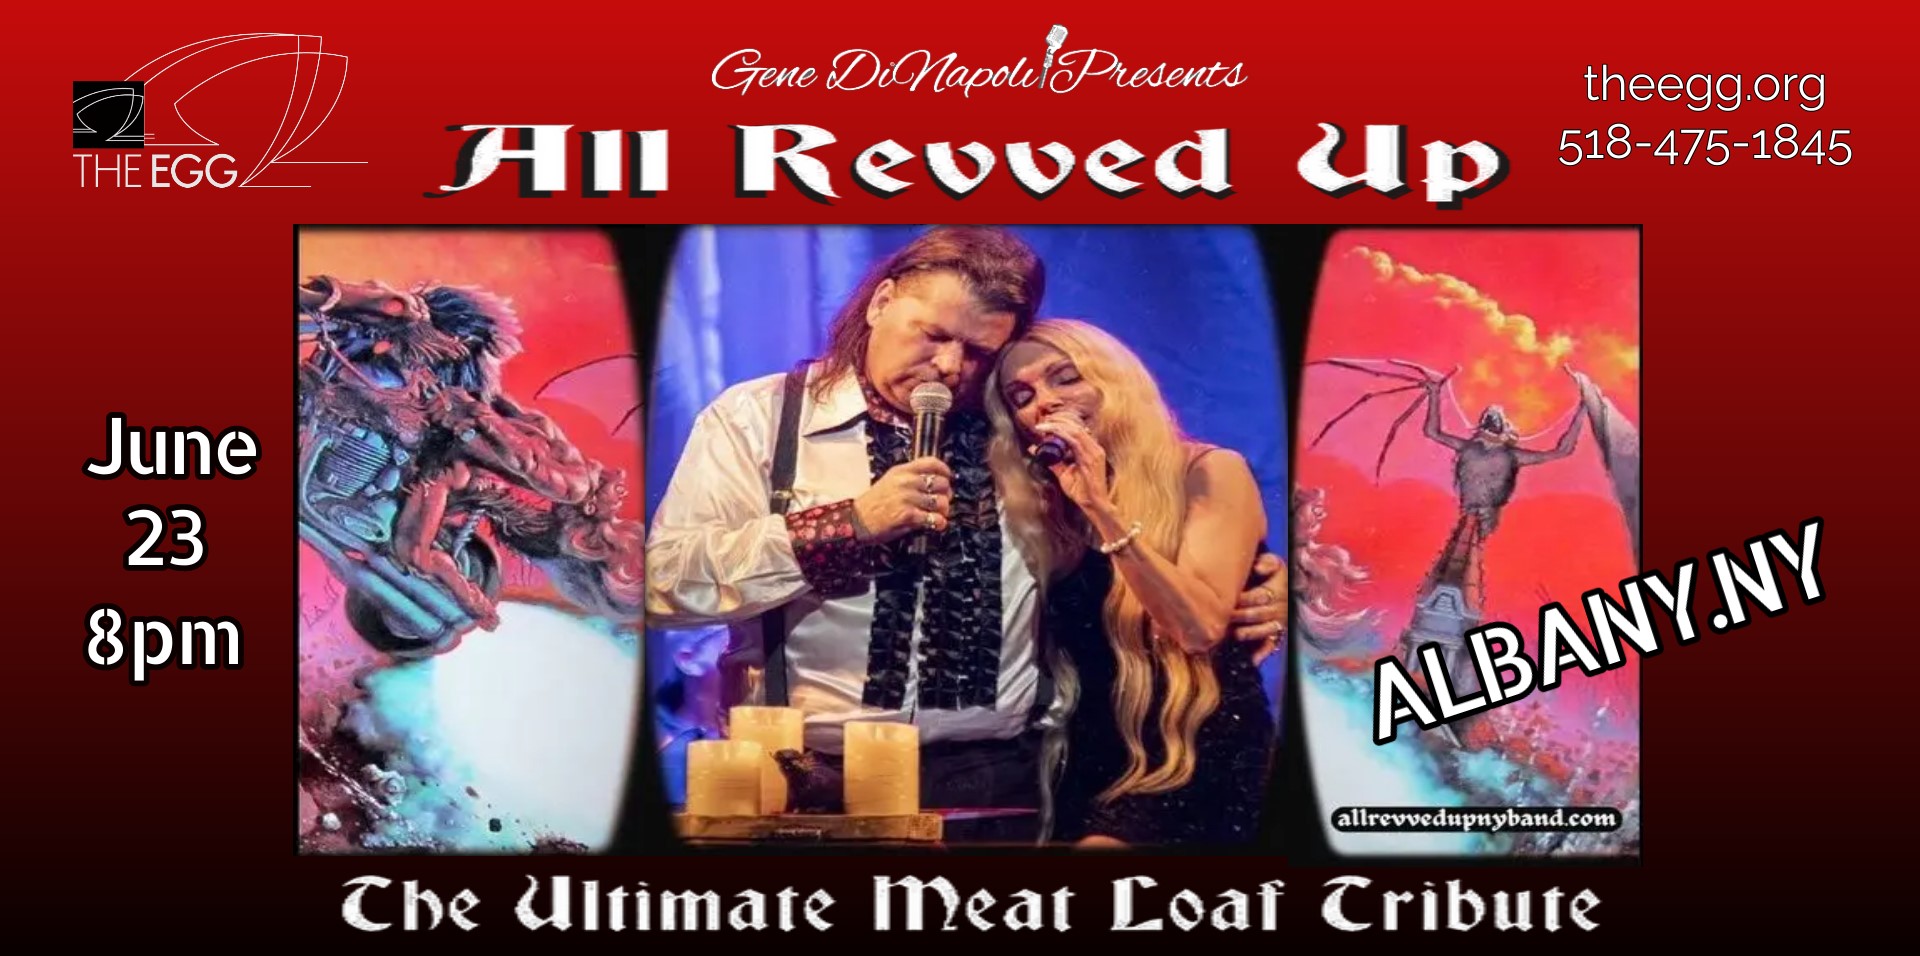 All Revved Up: The Ultimate Tribute to Meatloaf at The Egg!, Online Event